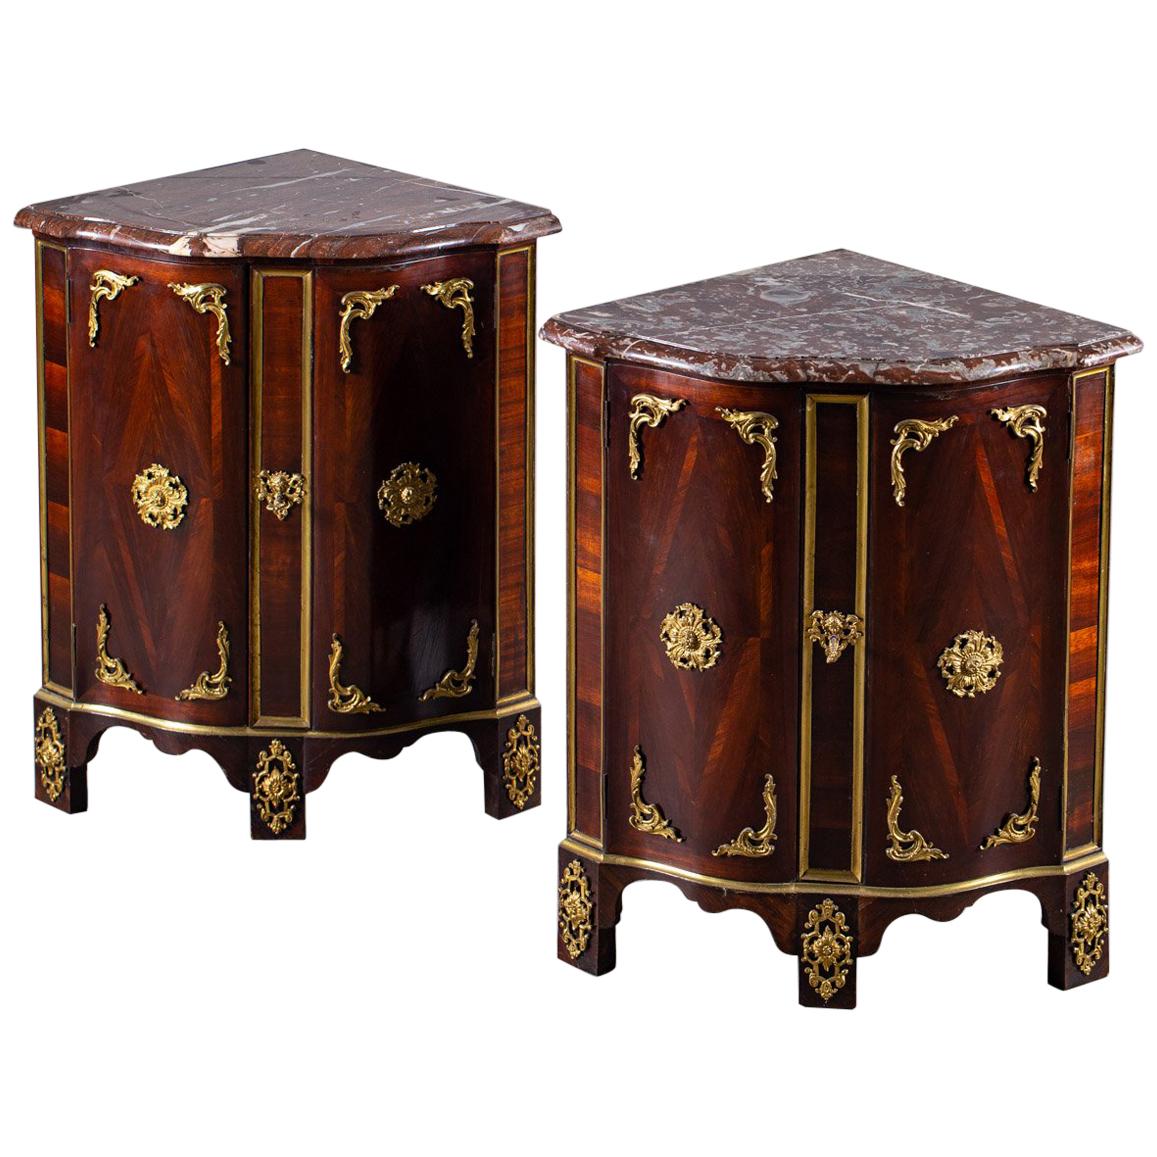 Pair of Antique French Régence Palisander Marble Top Corner Cabinets, circa 1740 For Sale